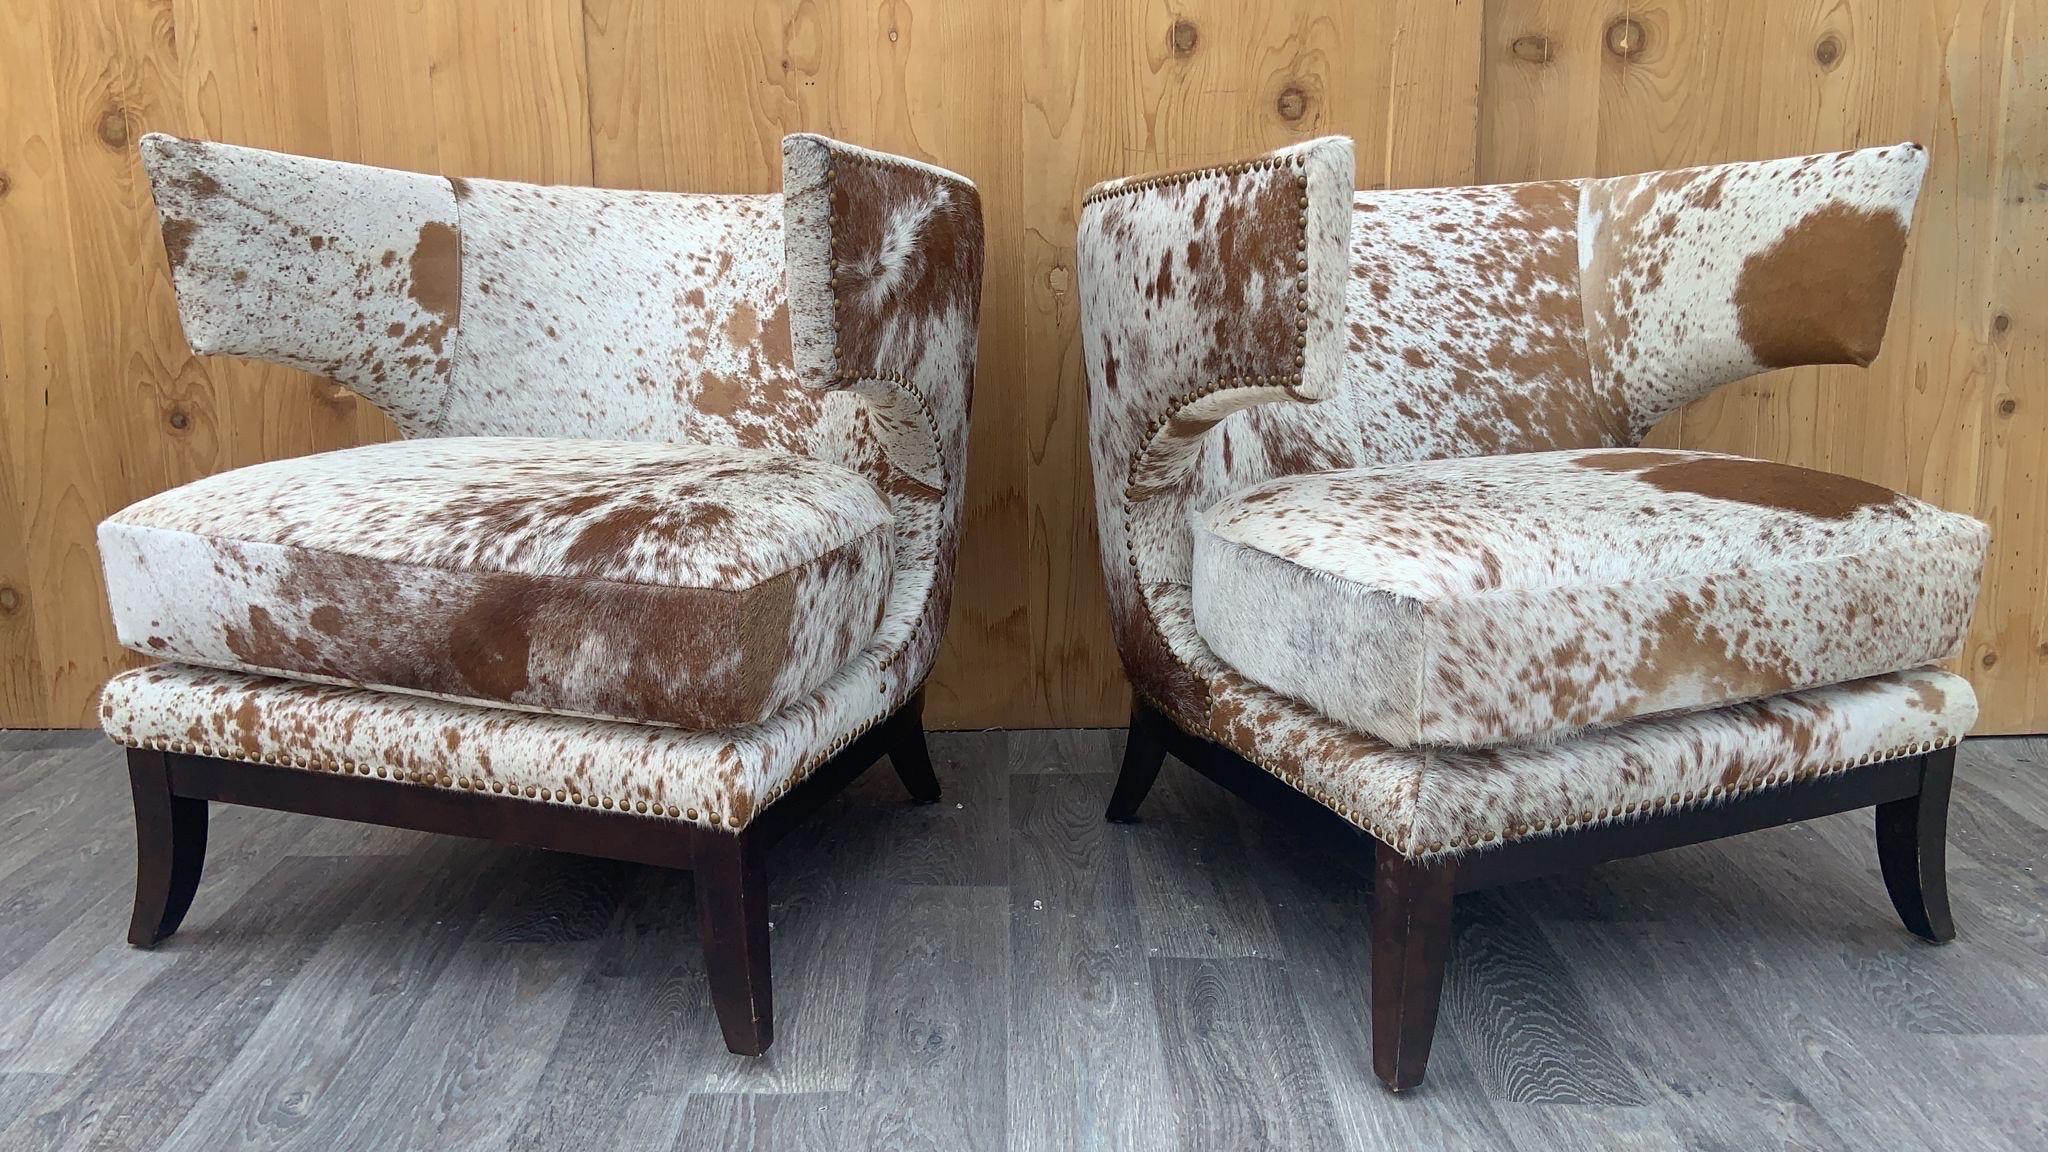 Hand-Crafted English Horseshoe Savoy Chairs Newly Upholstered in Brazilian Cowhide - Set of 2